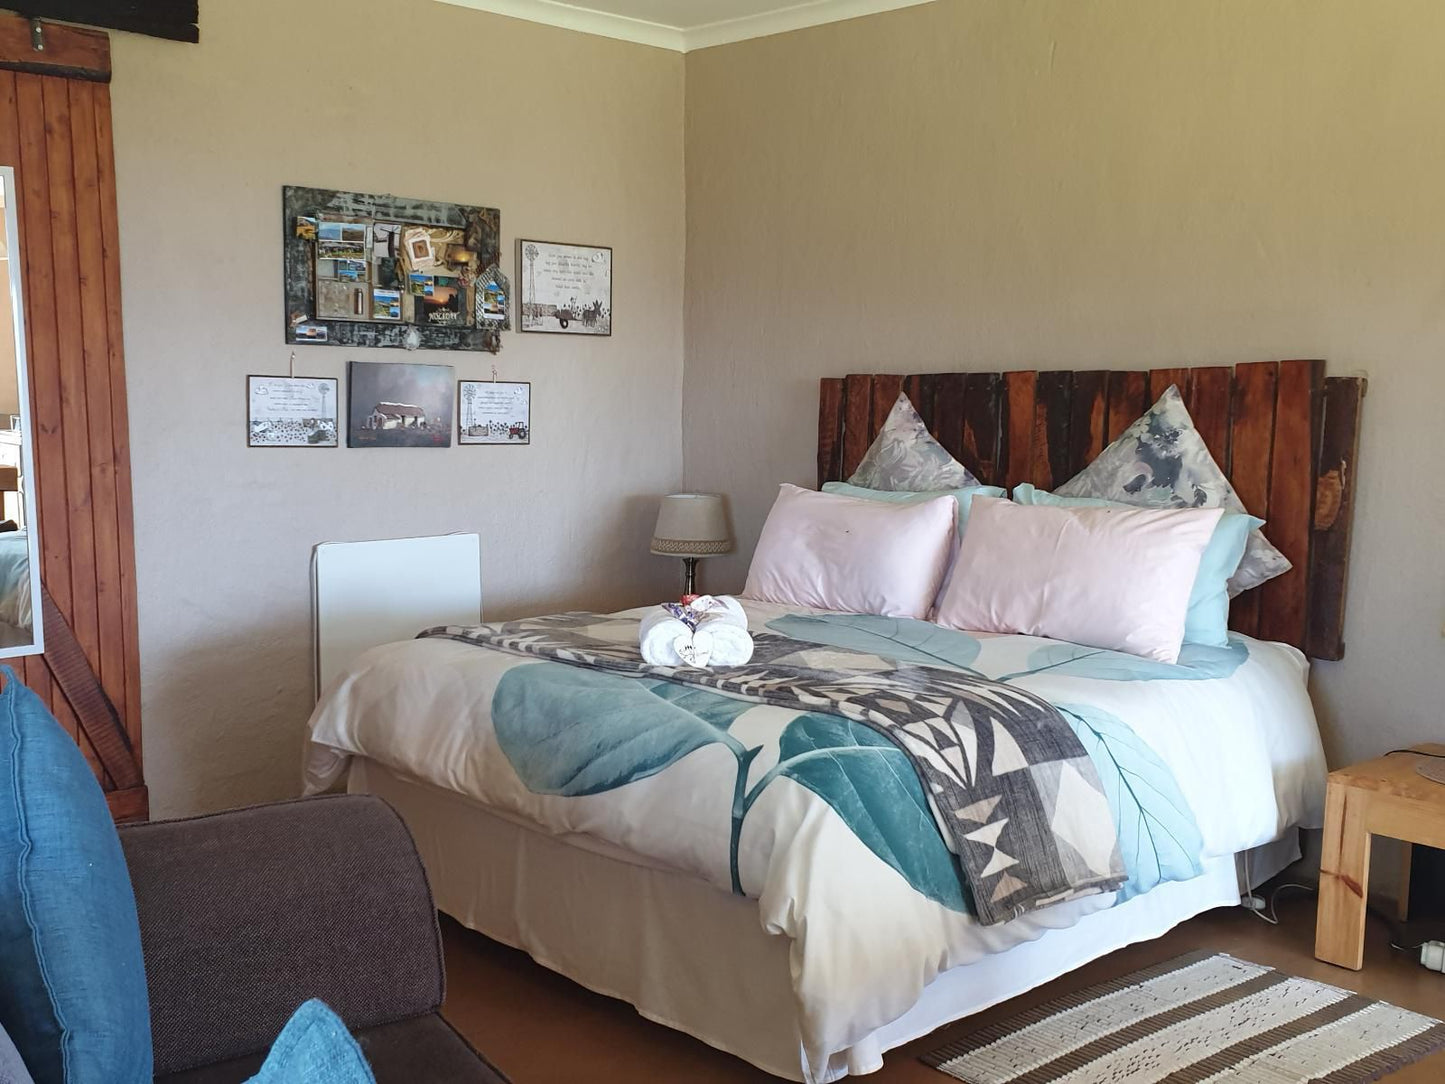 Thaba Lapeng Mountain Escape Clarens Free State South Africa Bedroom